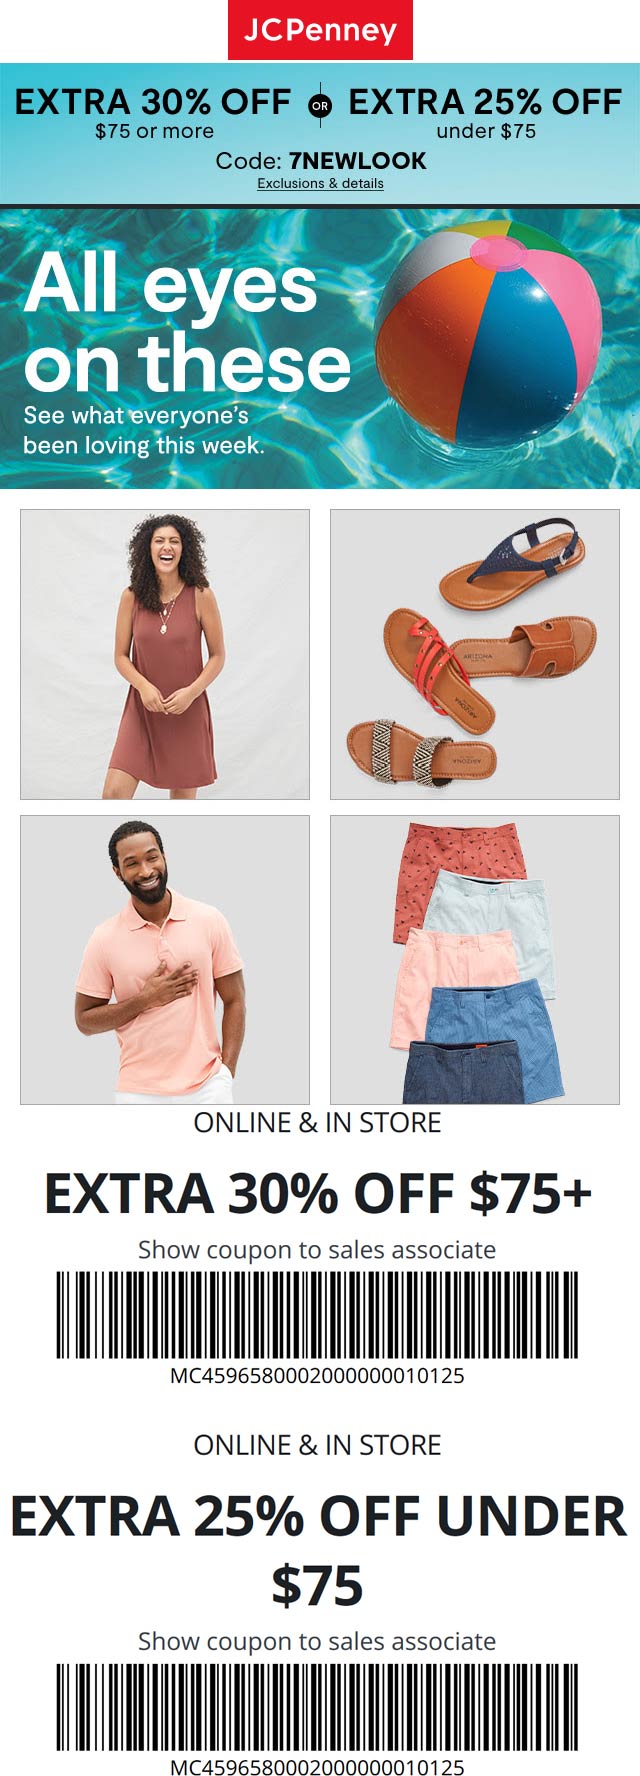 extra-25-30-off-at-jcpenney-or-online-via-promo-code-hooray9